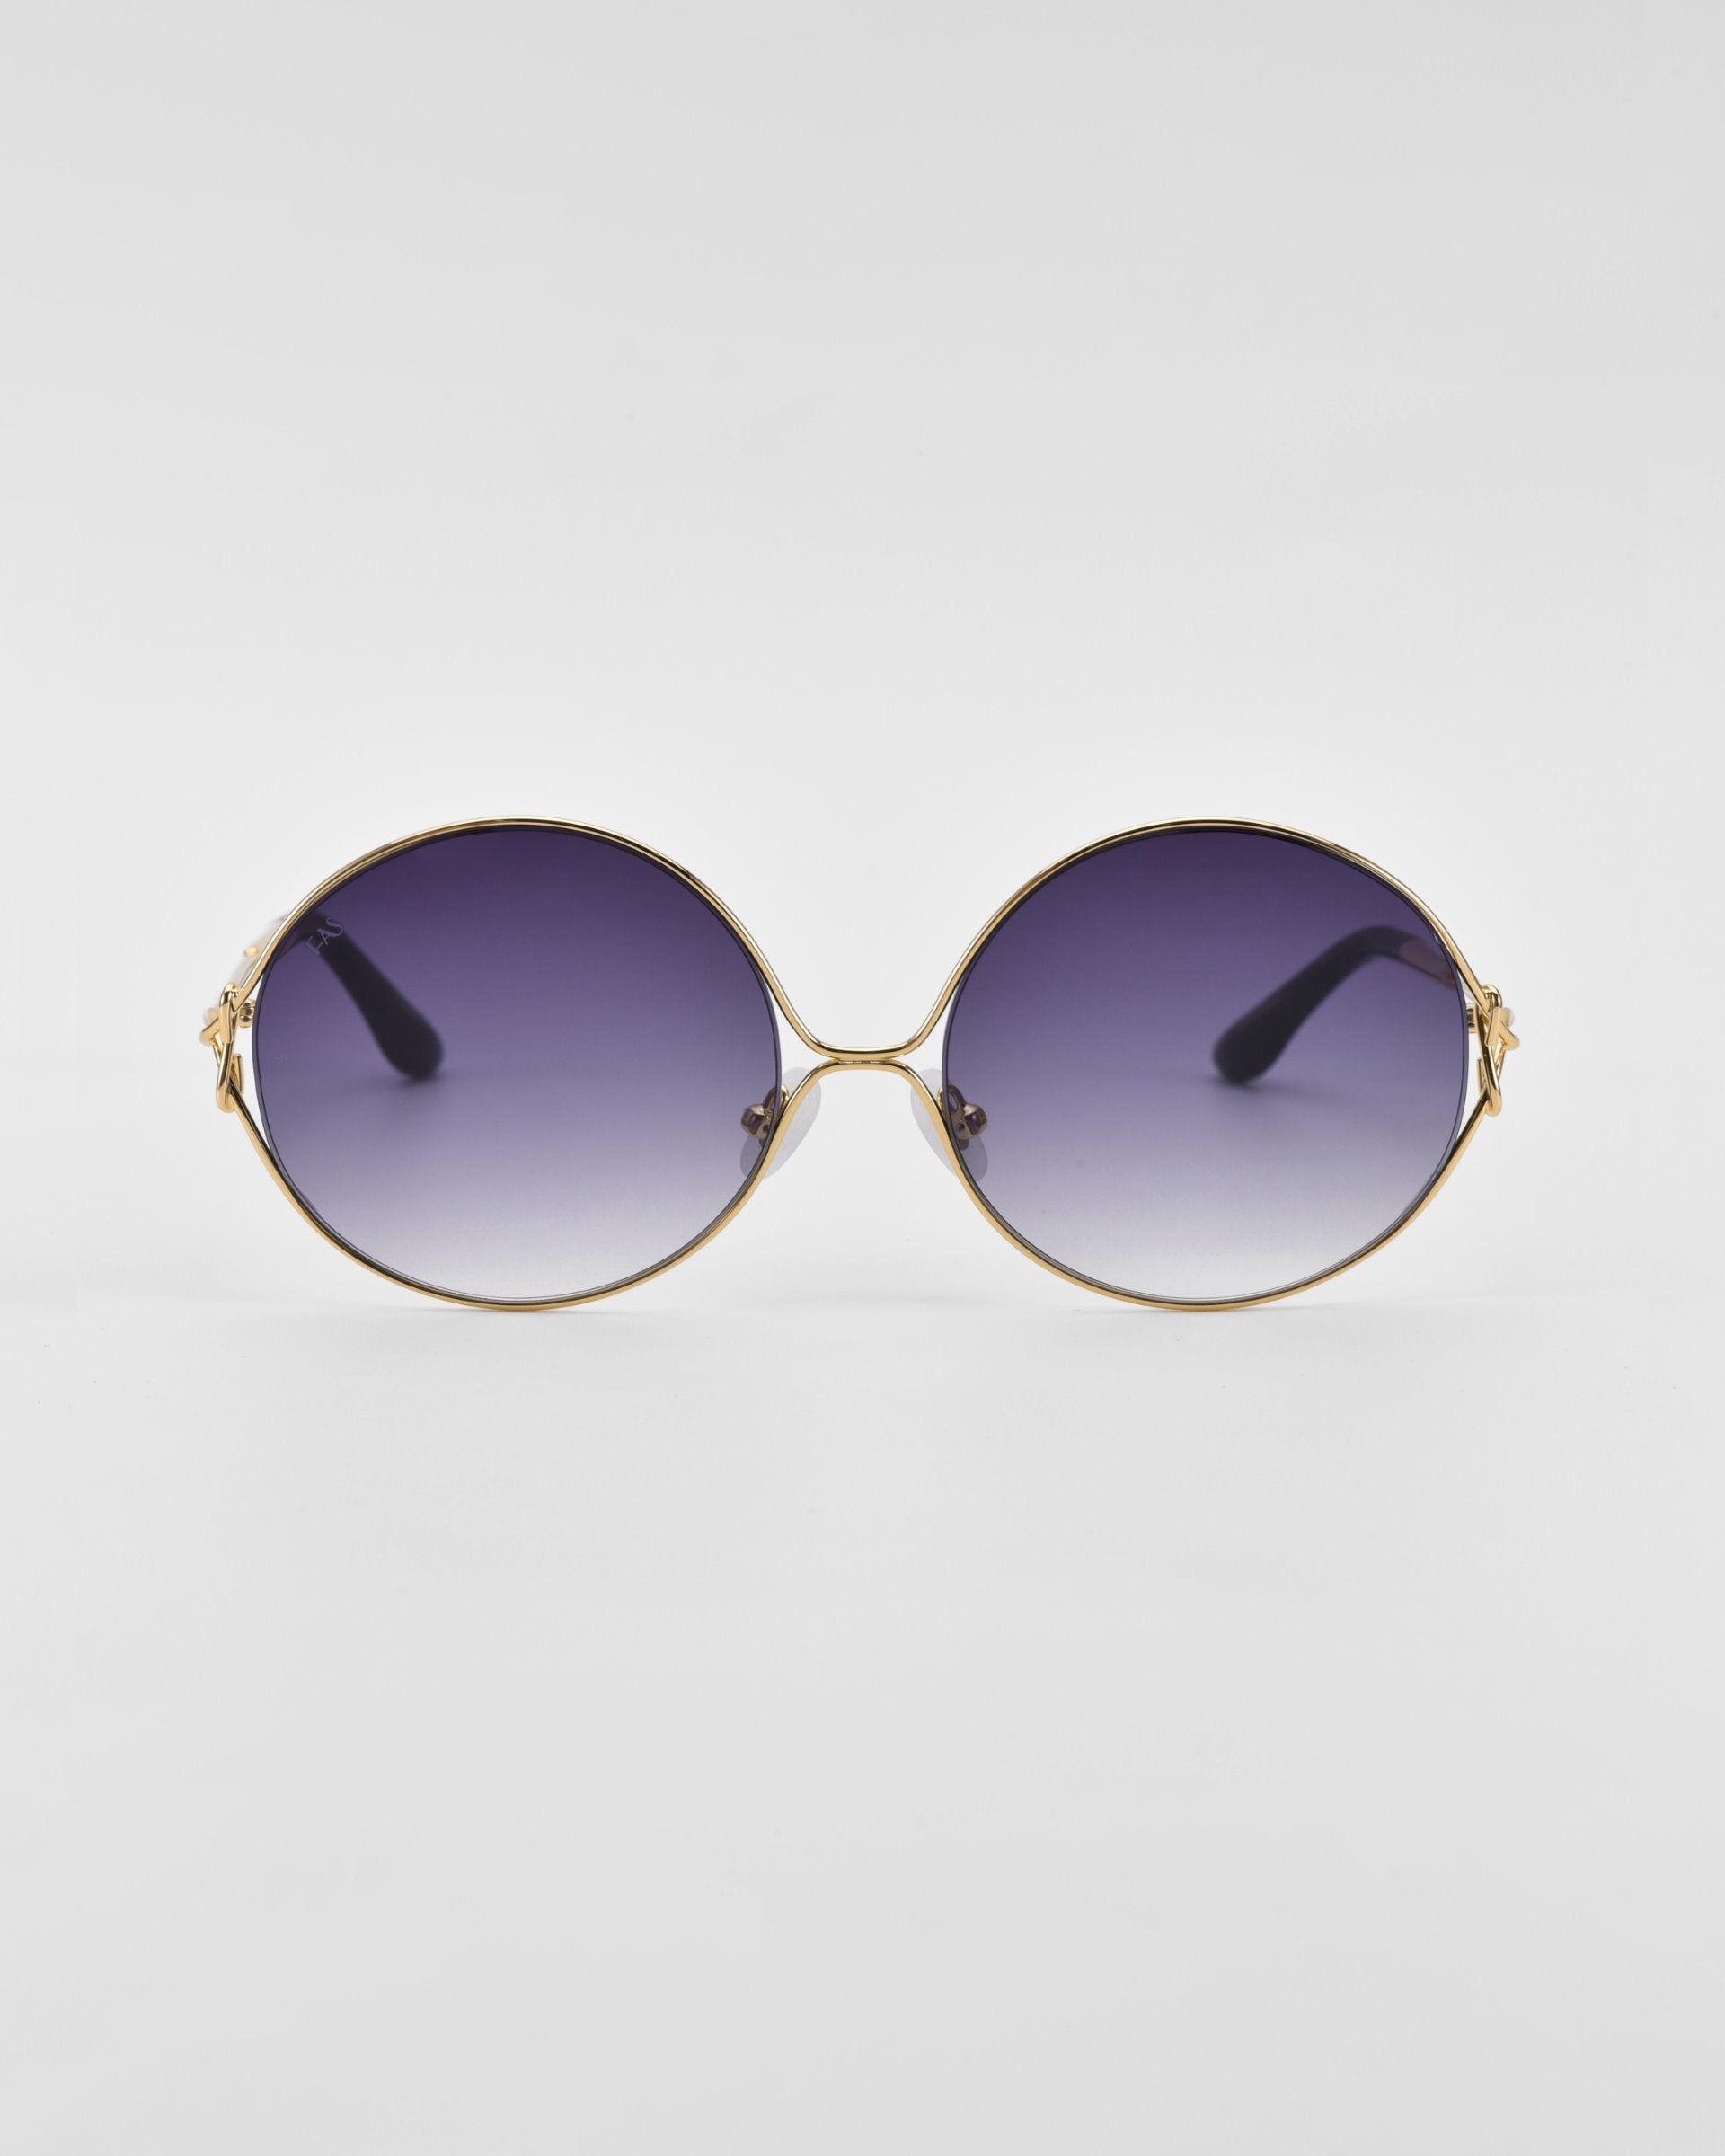 A pair of retro-inspired Aura sunglasses by For Art&#39;s Sake® with oversized round gold frames and purple gradient lenses. The temples are adorned with small decorative elements near the hinges, set against a plain white background.